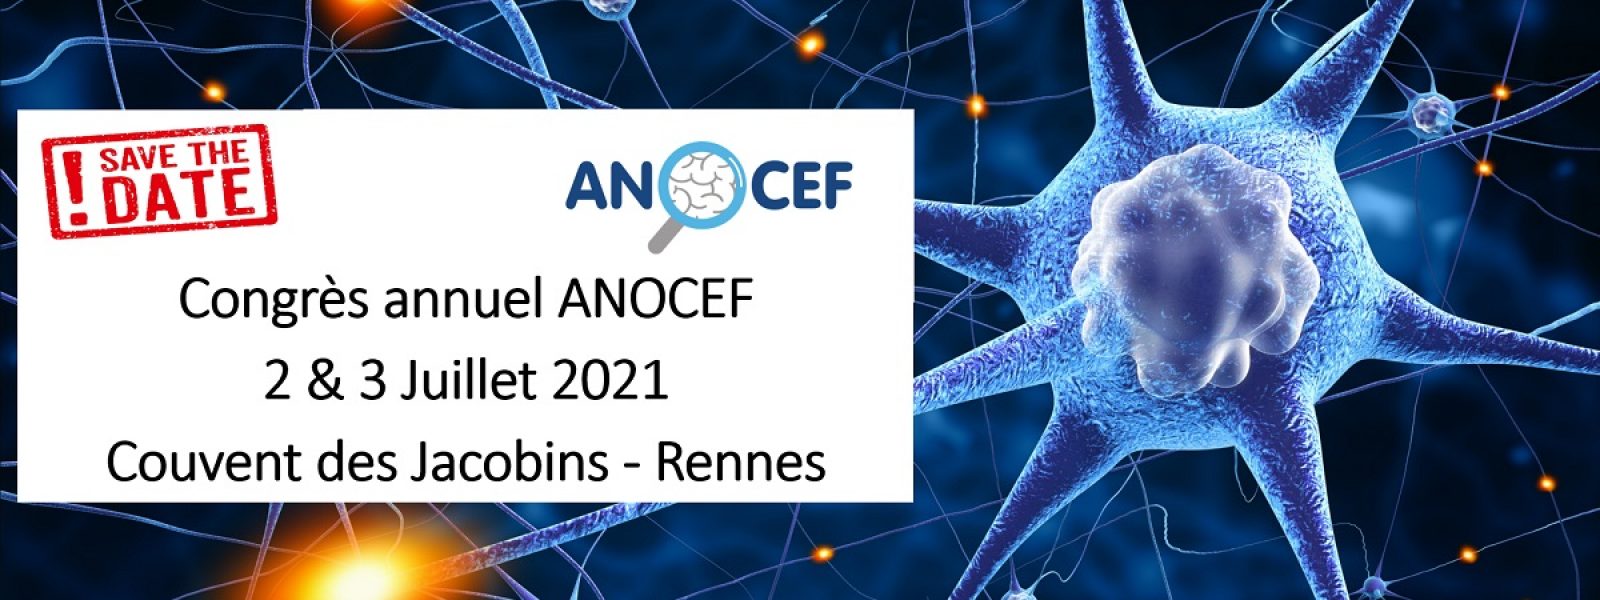 Annual Congress of the Association of French-speaking Neuro-oncologists - ANOCEF 2021